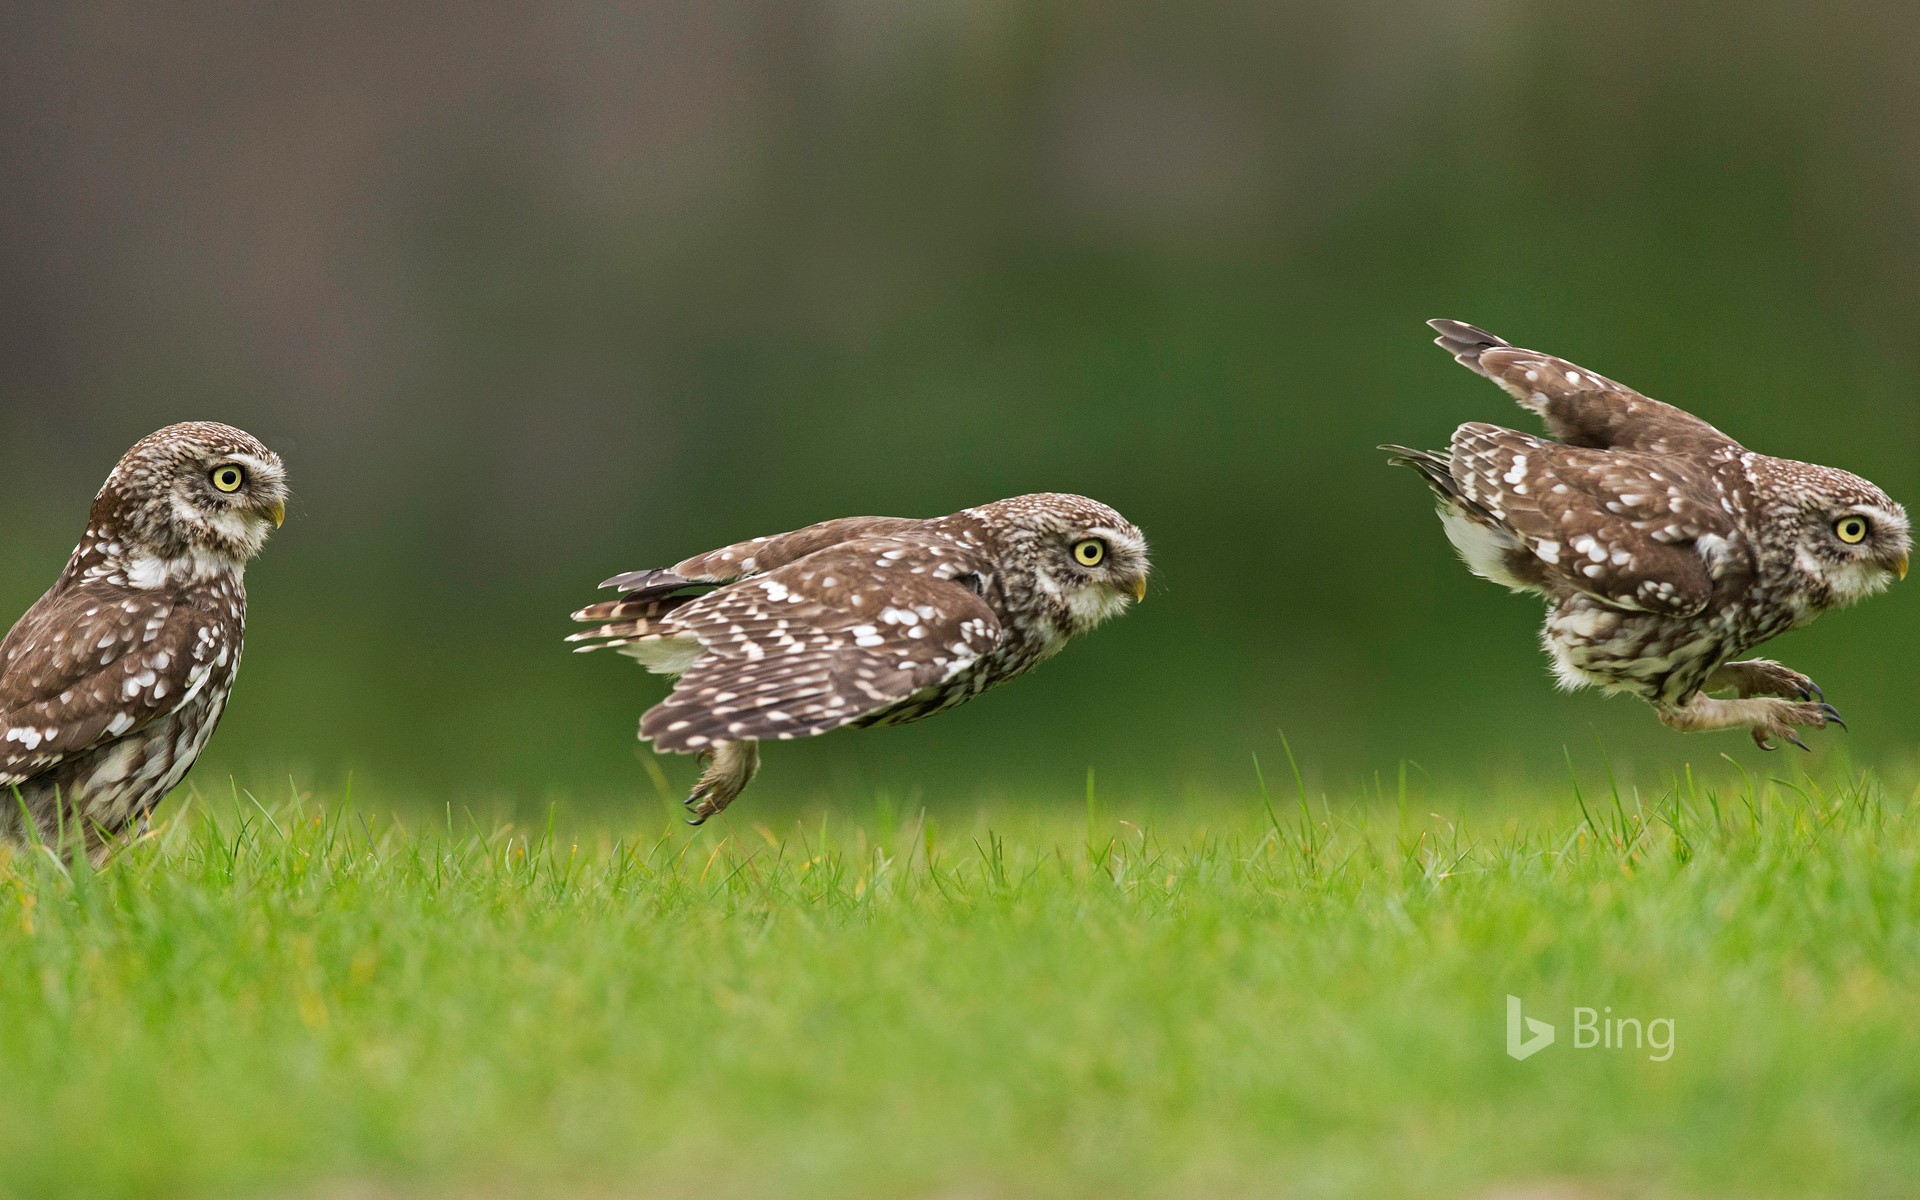 A little owl hunting on the ground